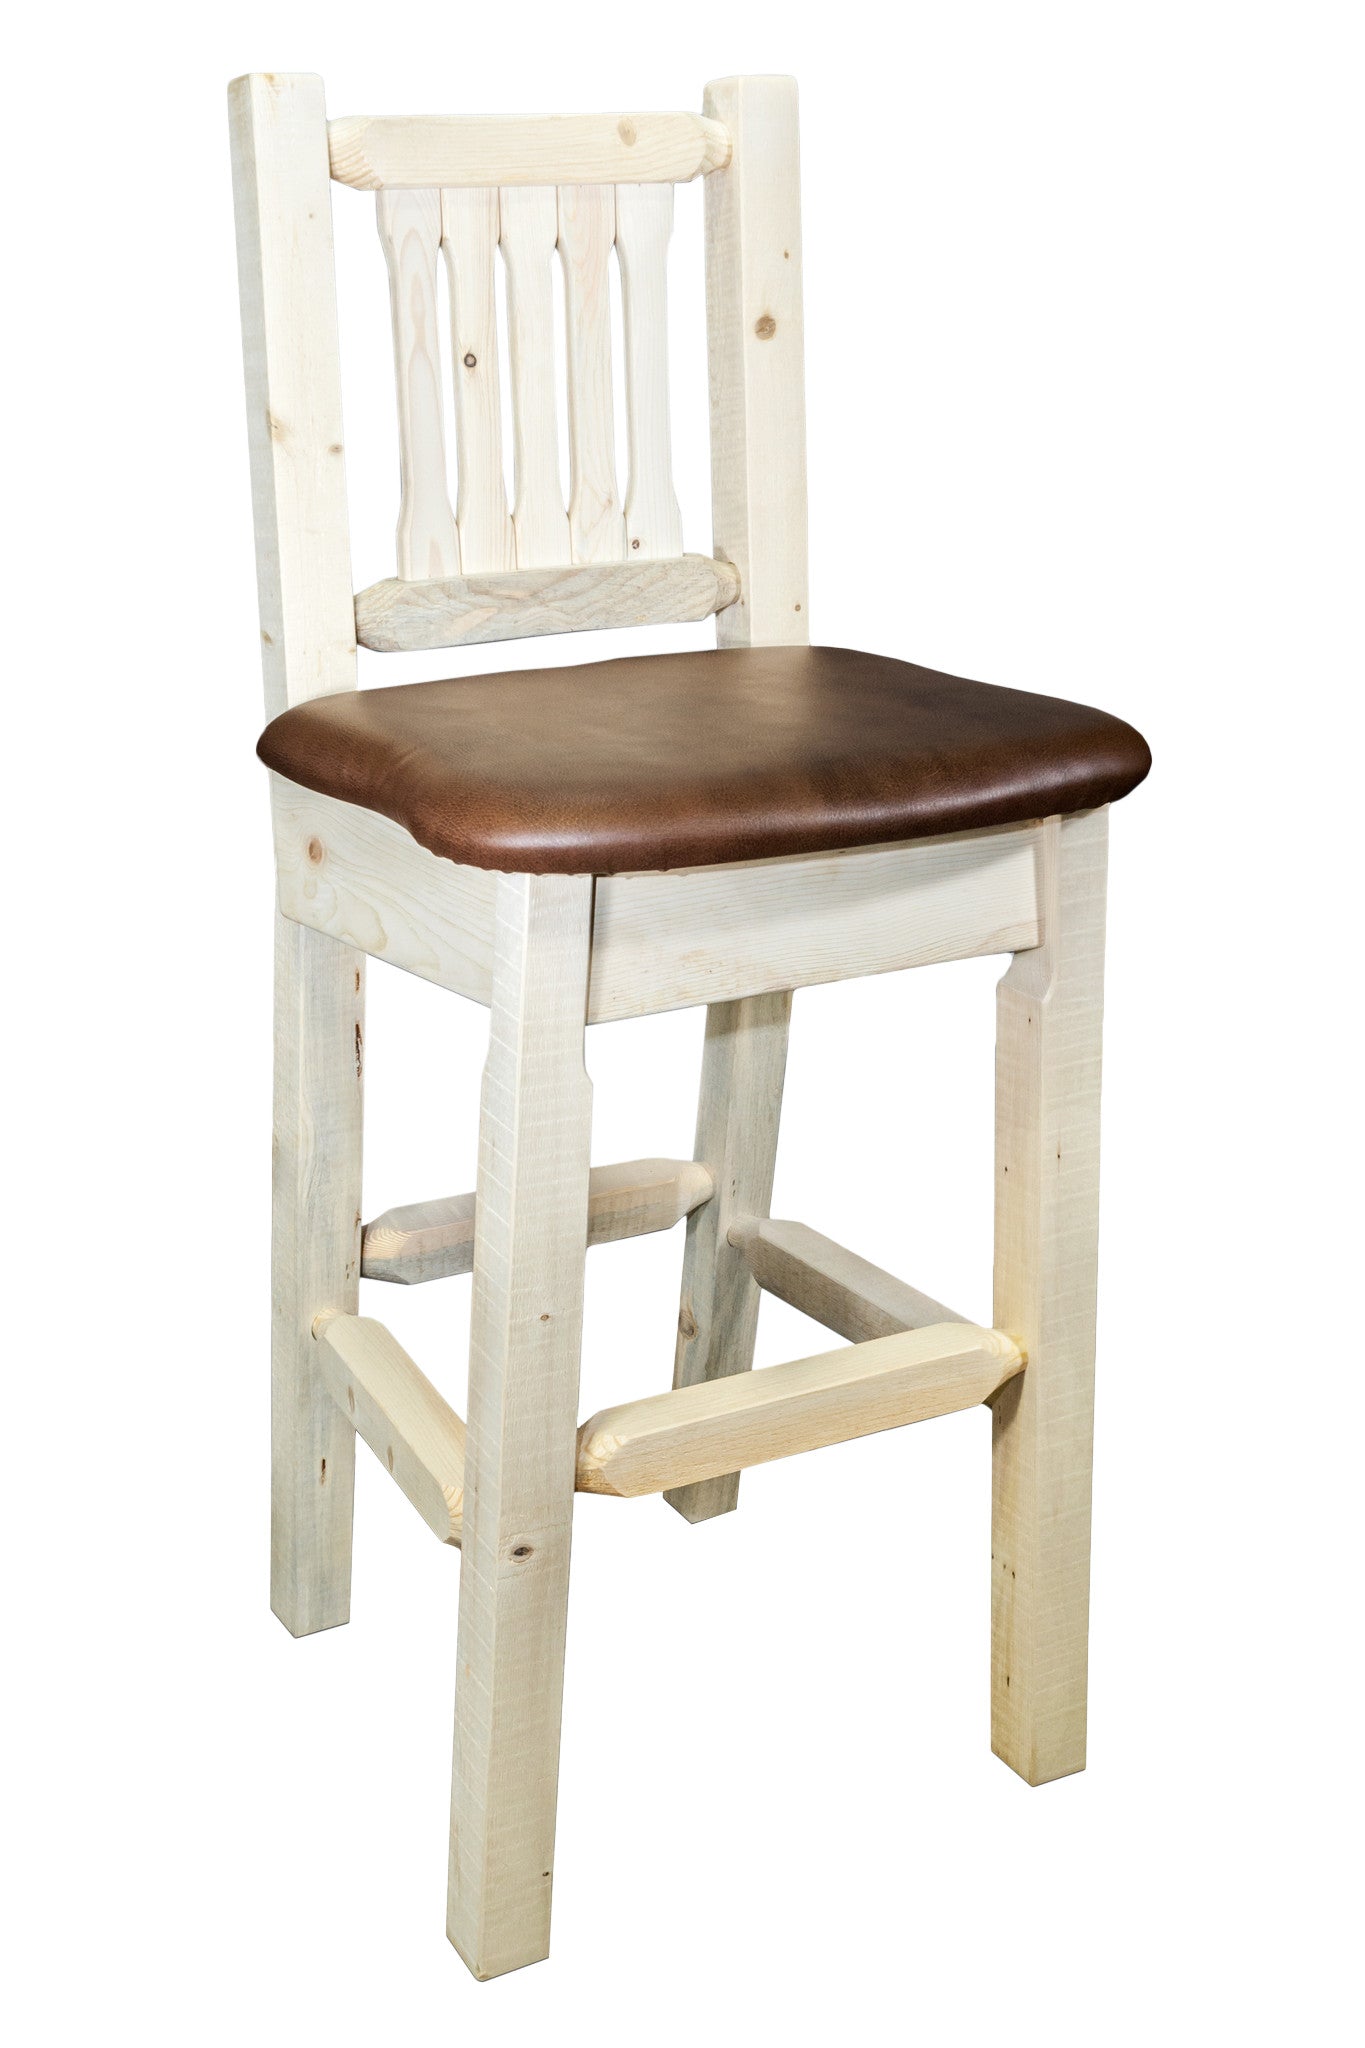 Montana Woodworks Homestead Collection Wood Barstool w/ Back w/ Upholstered Seat, Saddle Pattern